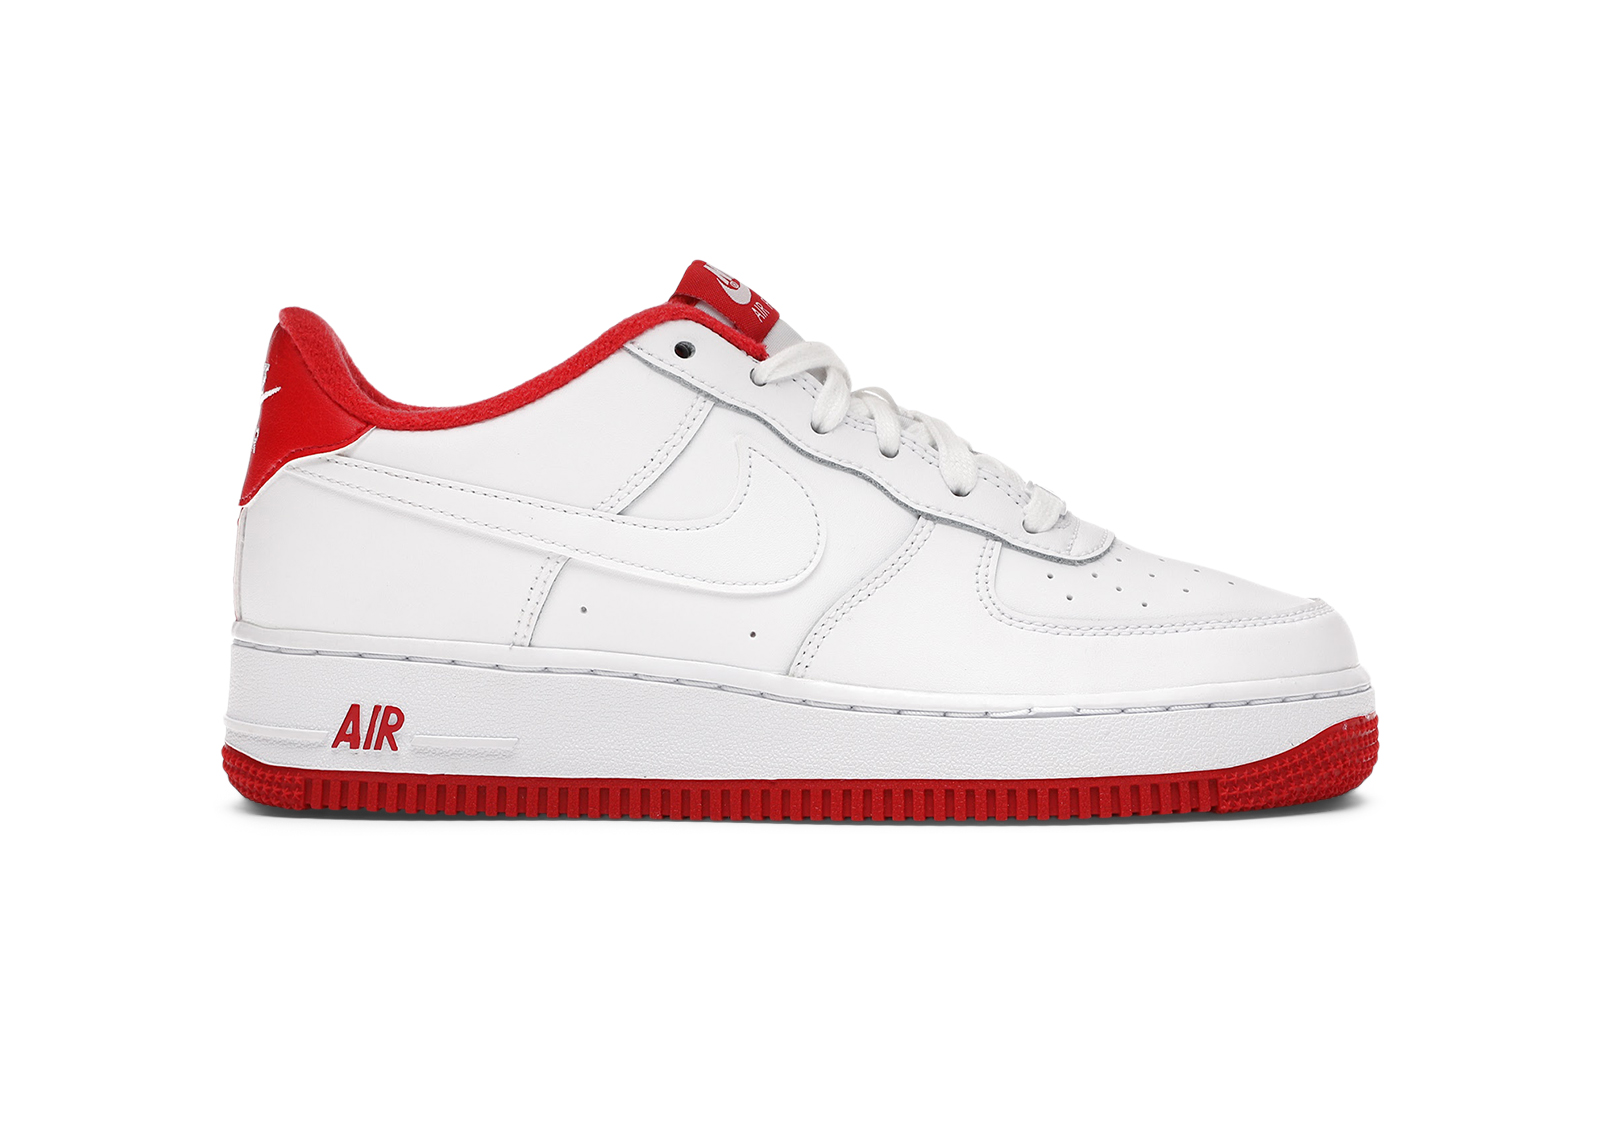 Nike Air Force 1 White University Red (GS) - CD6915-101